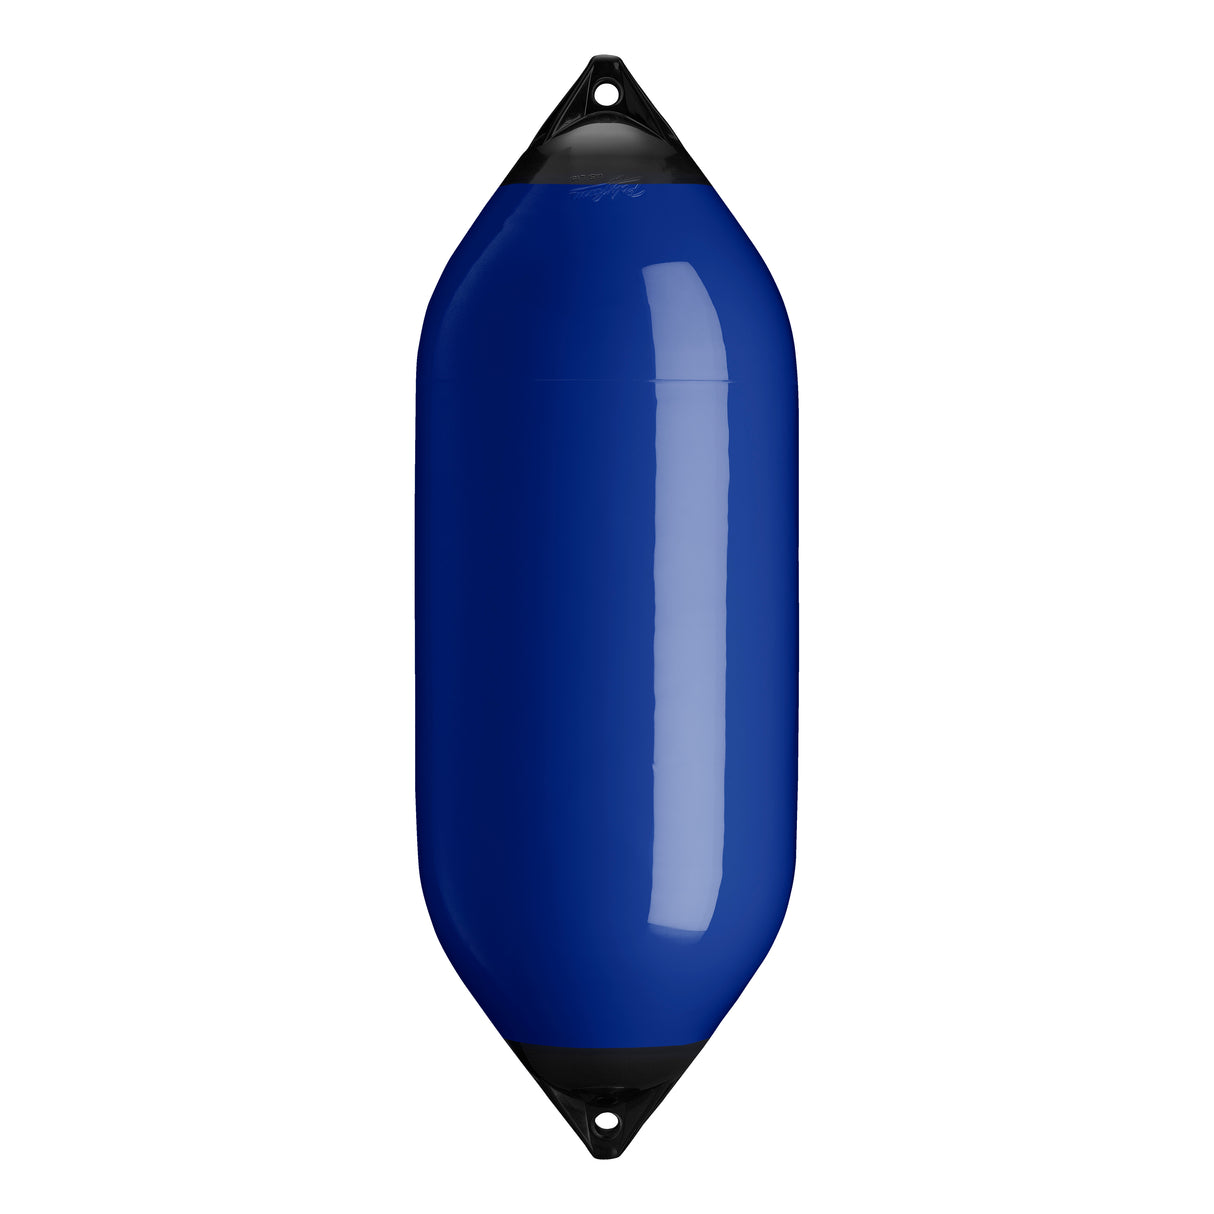 Cobalt Blue boat fender with Navy-Top, Polyform F-10